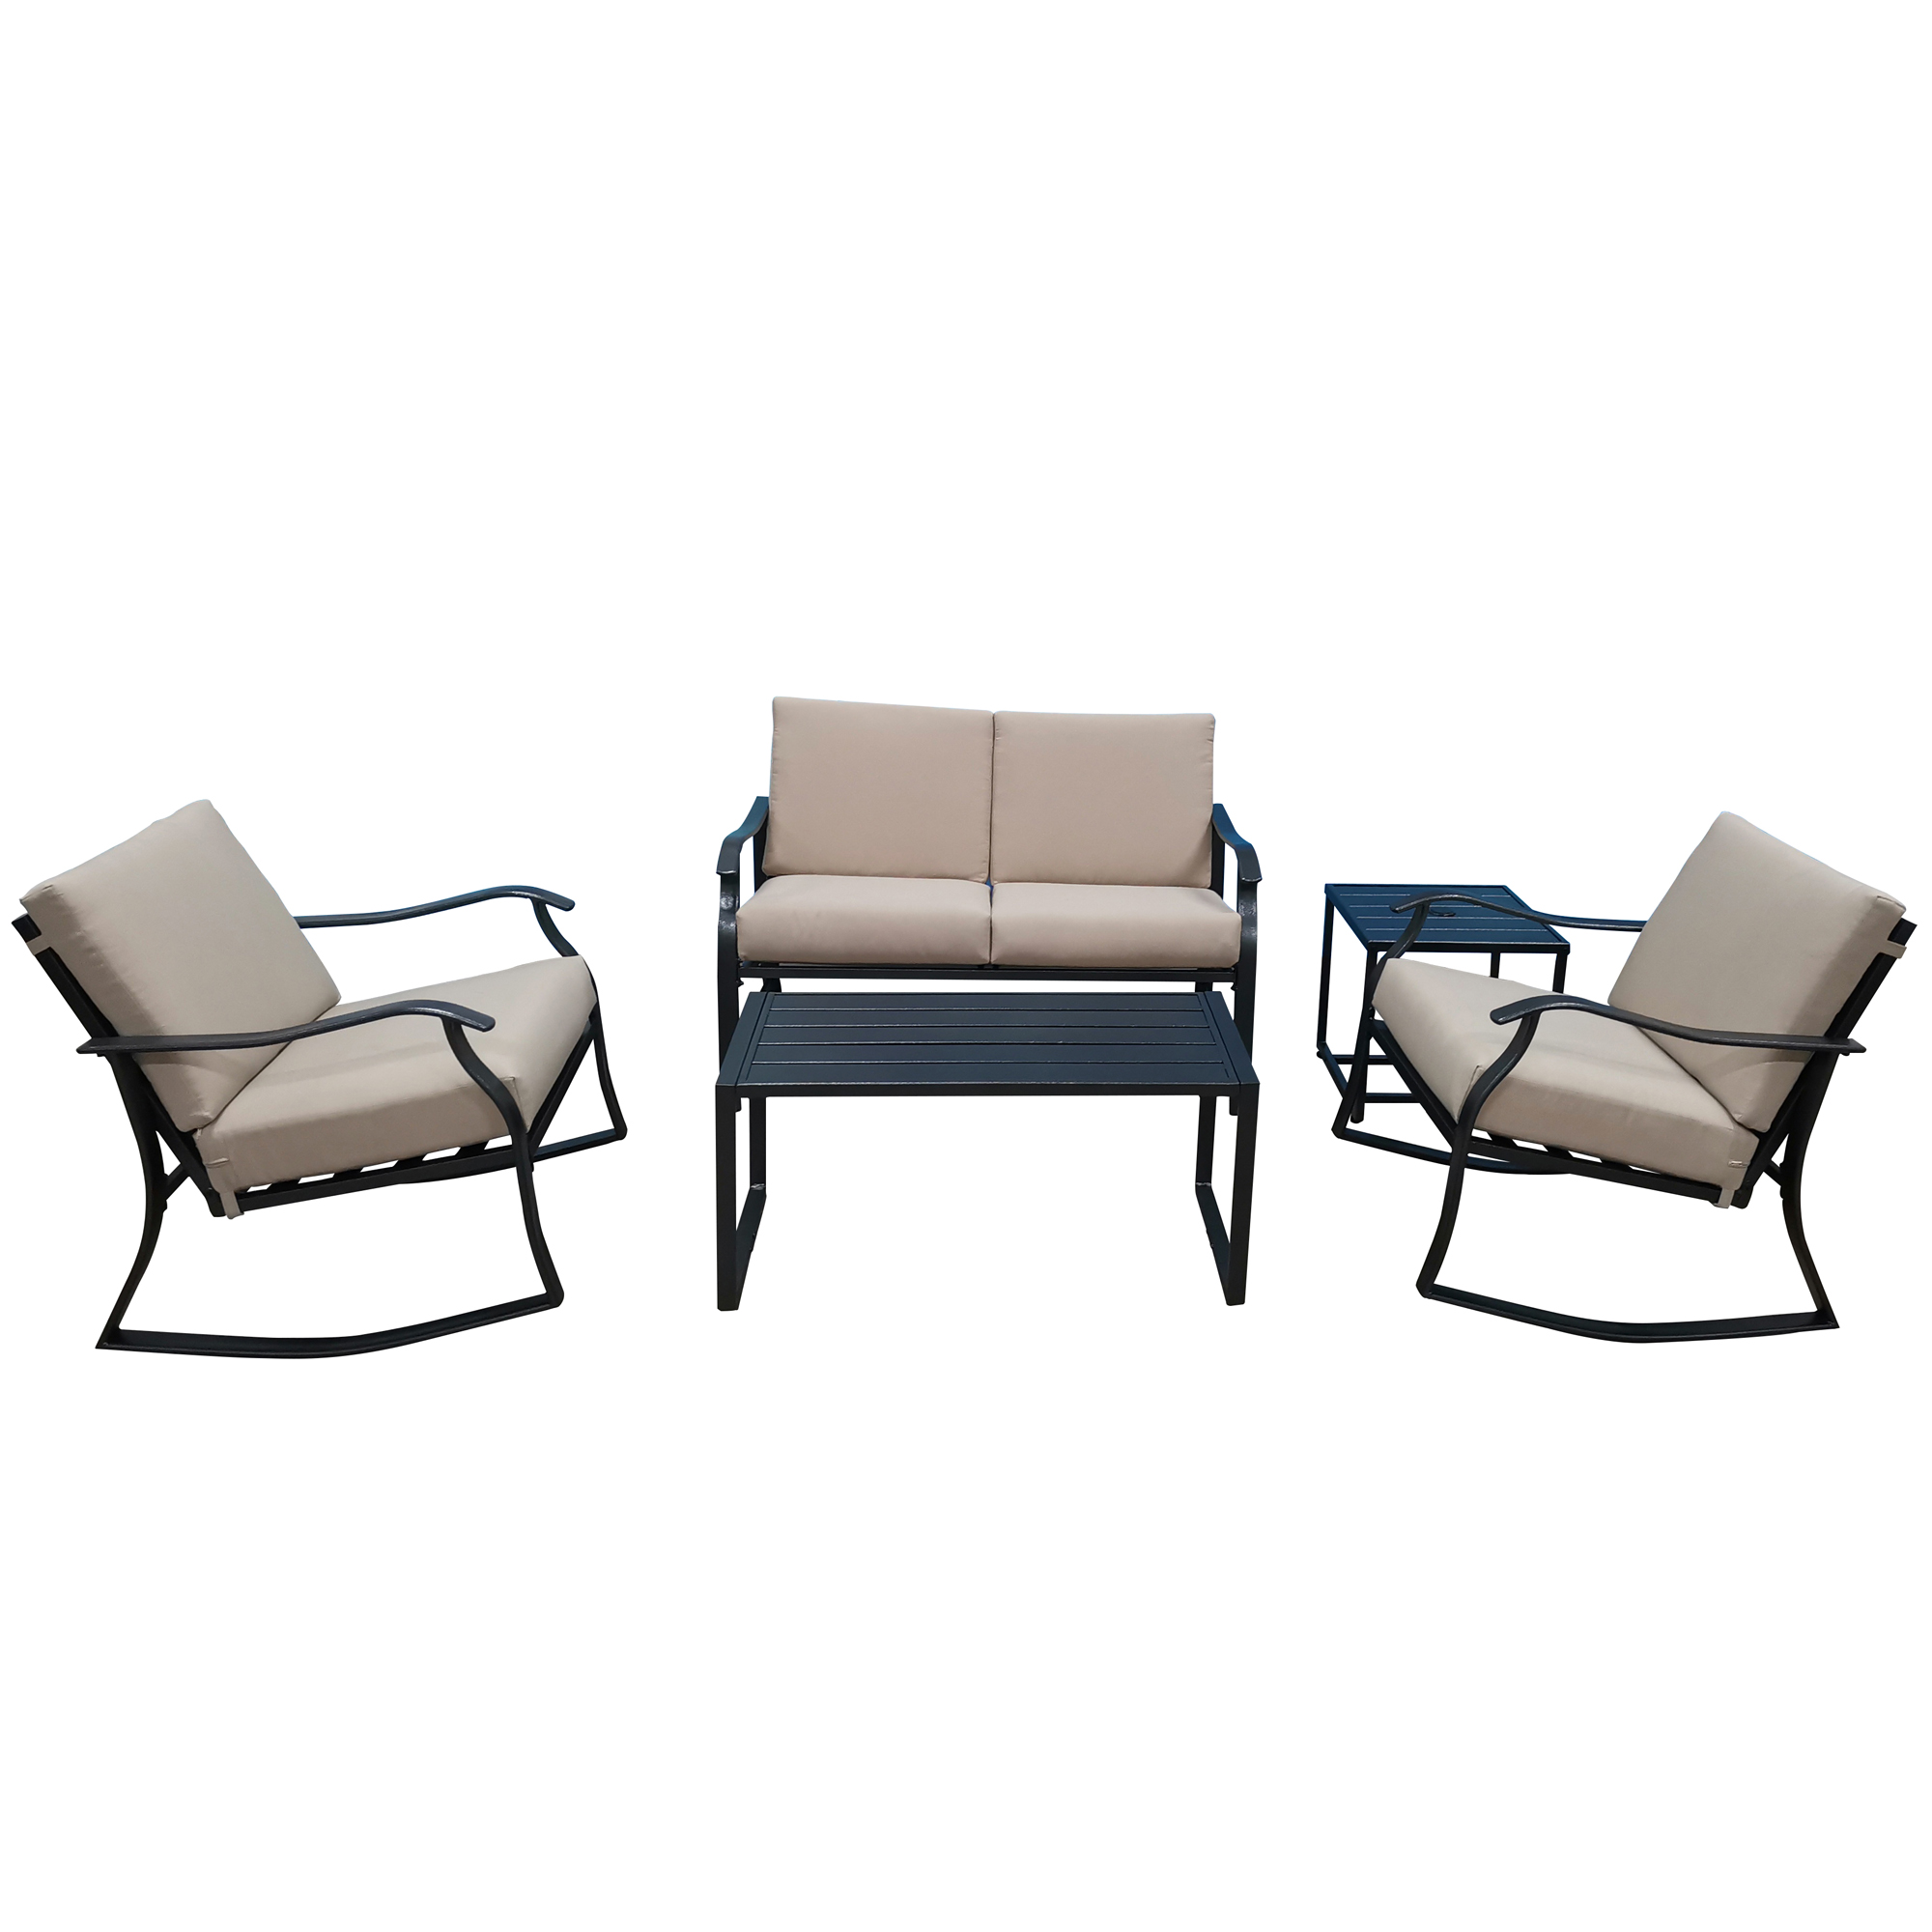 5 Pieces Outdoor Furniture Sets, Metal Patio Set with Coffee Table, Side Table, Loveseat, 2 Rocking Chairs, and 4 Chair Cushions, Bistro Set Balcony Furniture for Home Lawn, Beige, LJ3123 - image 3 of 9